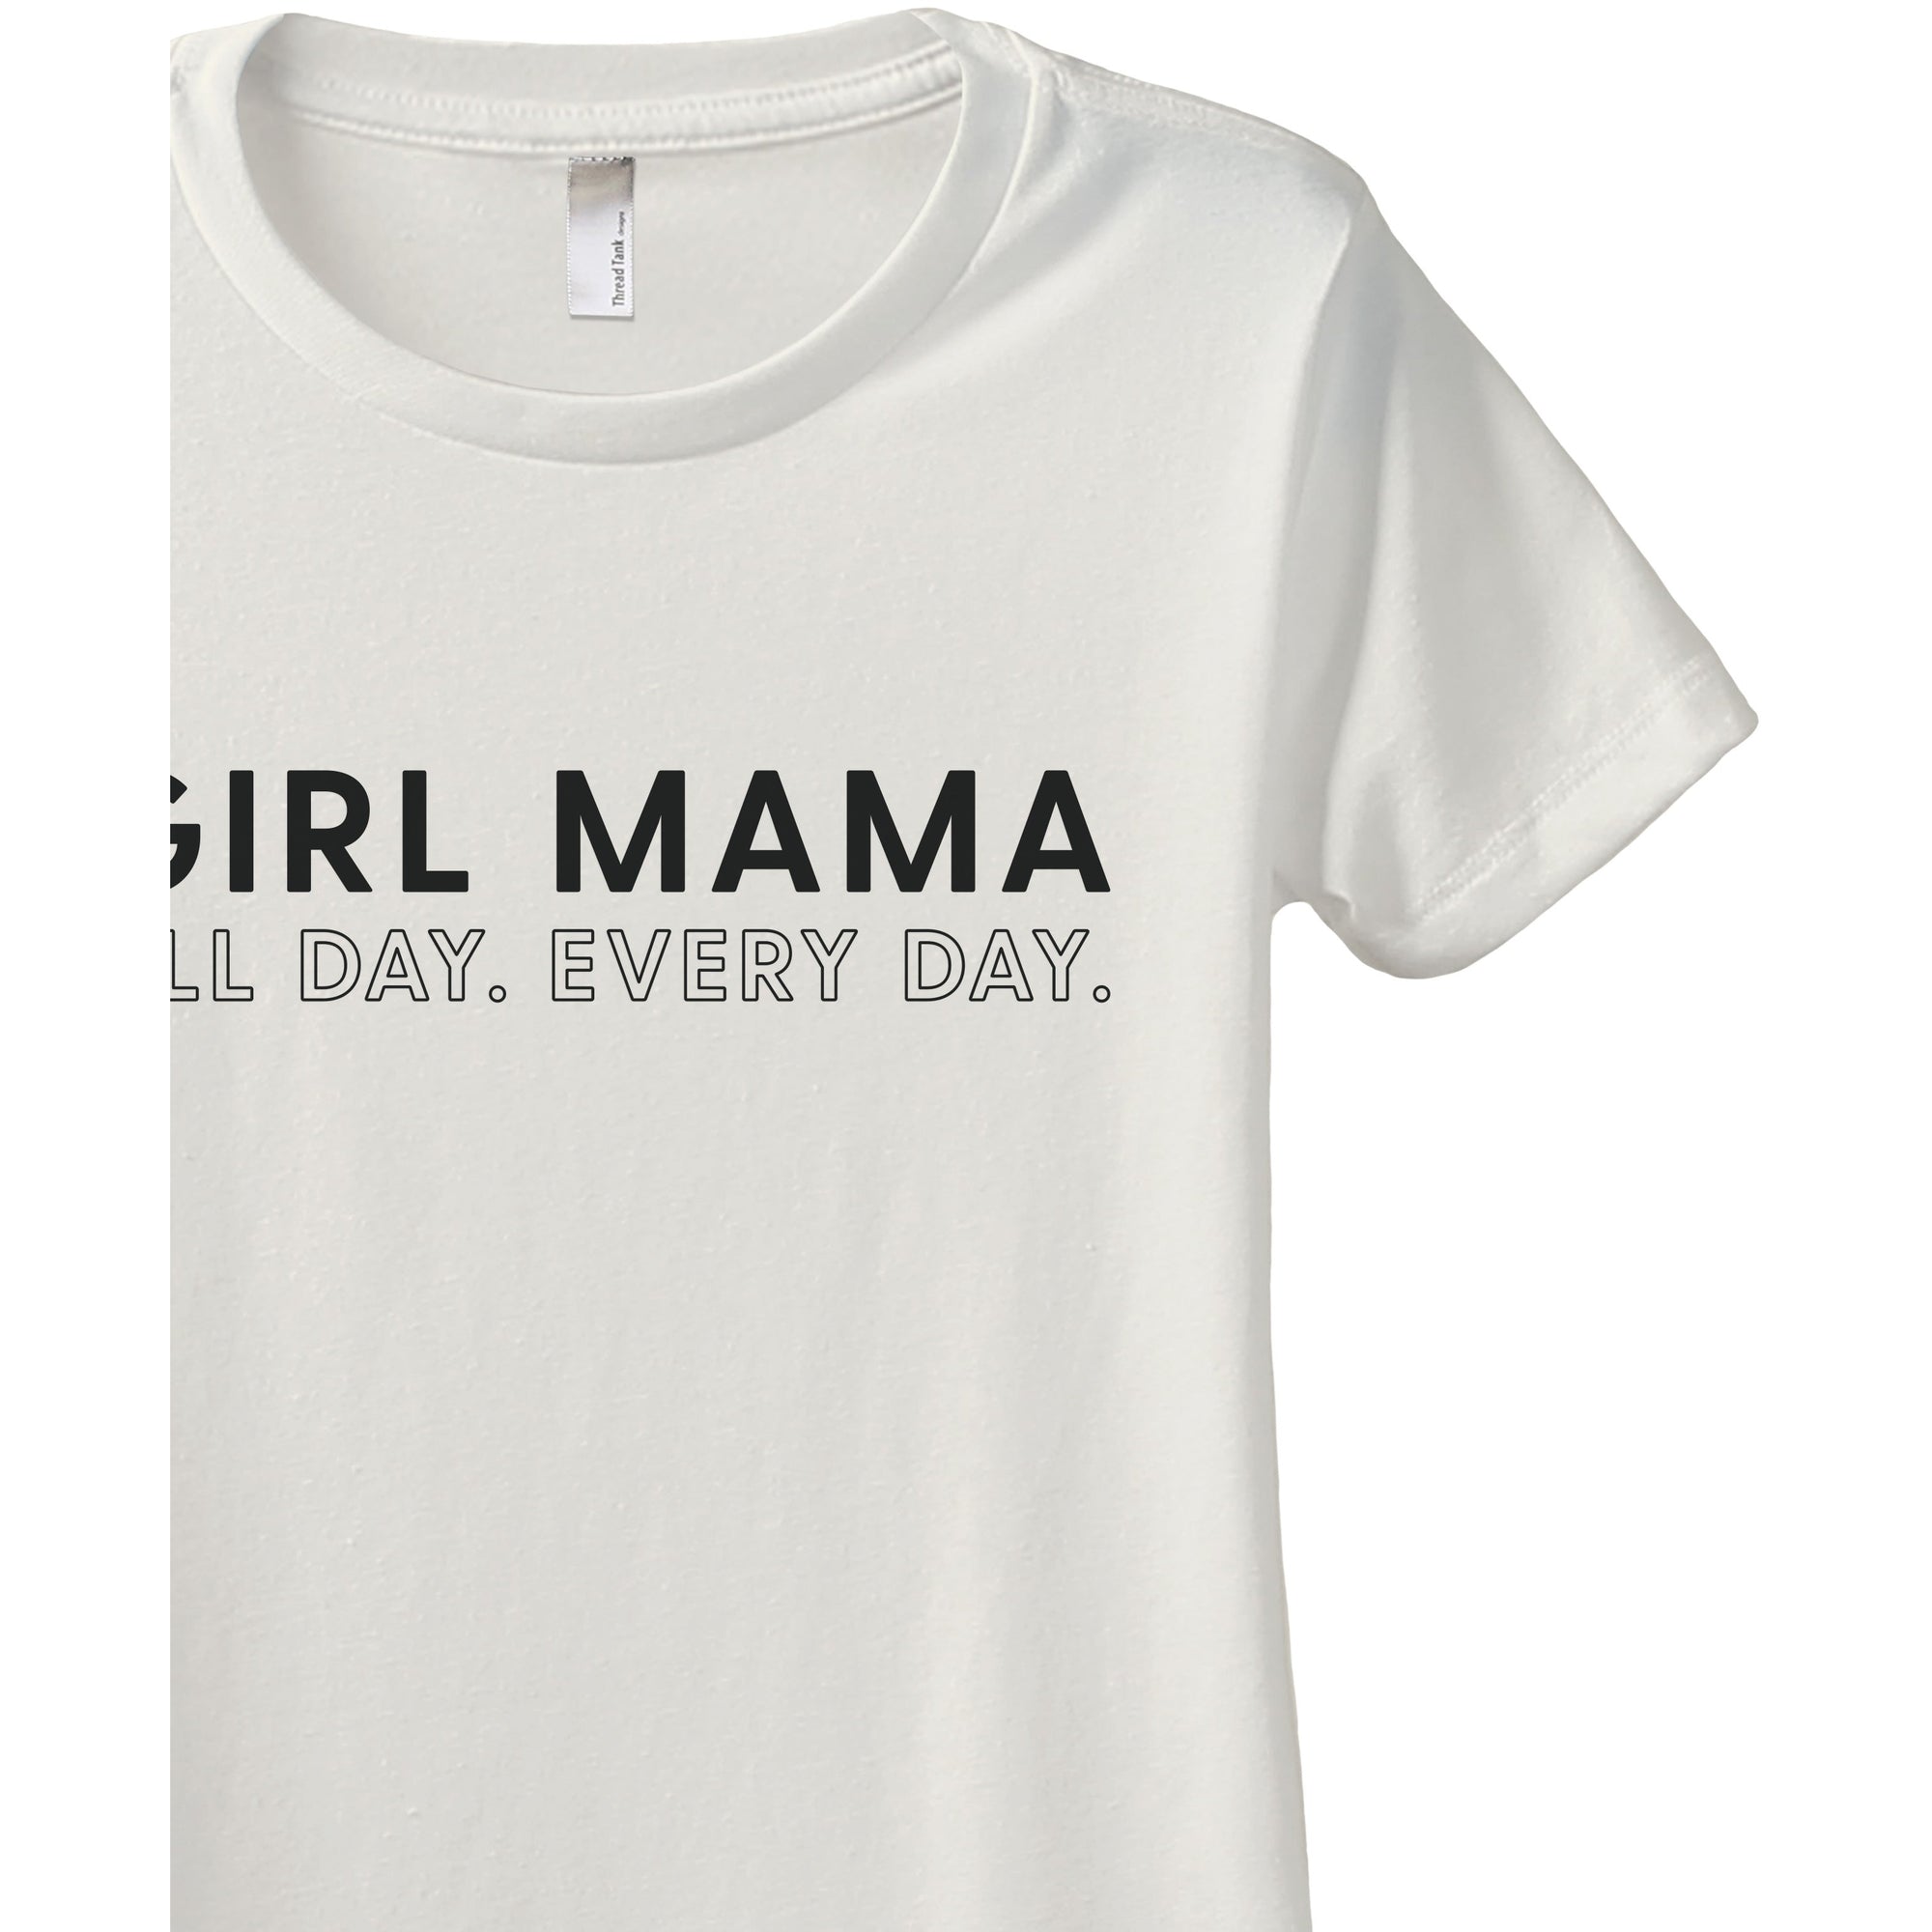 Girl Mama All Day Every Day Women's Relaxed Crewneck T-Shirt Top Tee Vintage White Zoom Details
